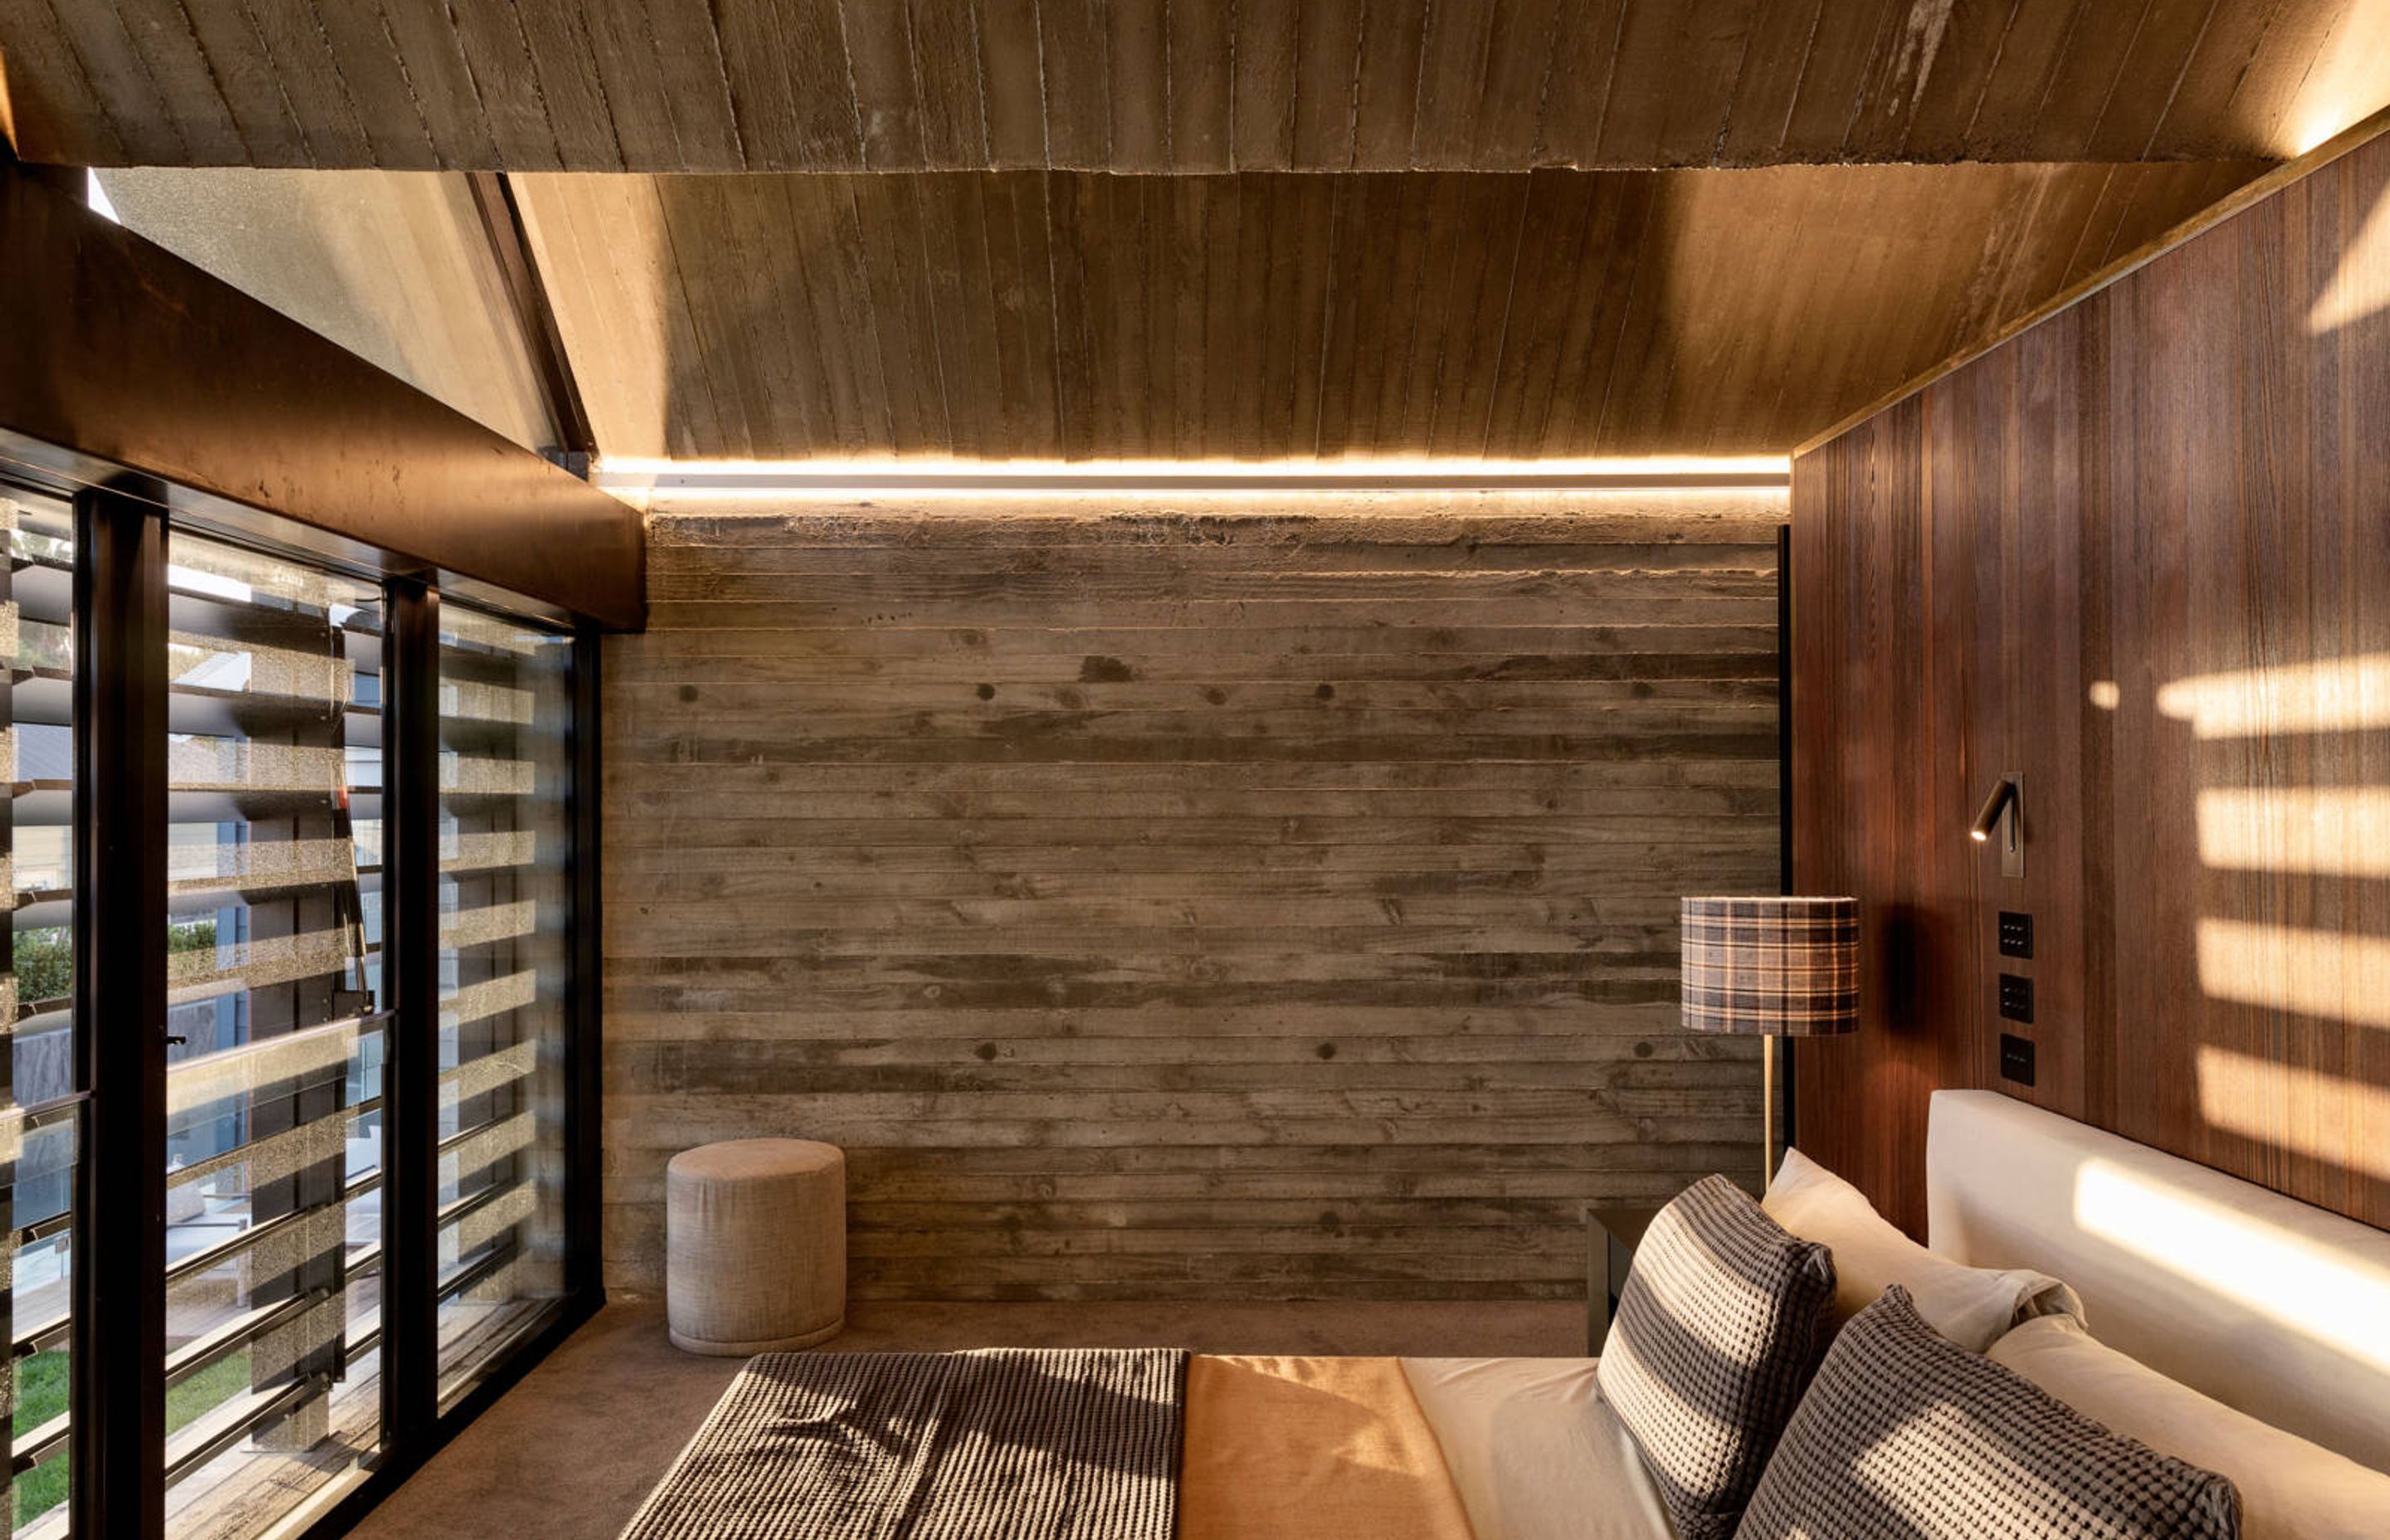 The guest suite enjoys the striking zigzag concrete ceiling, along with walls in weatherboard-shuttere concrete and timber panelling.